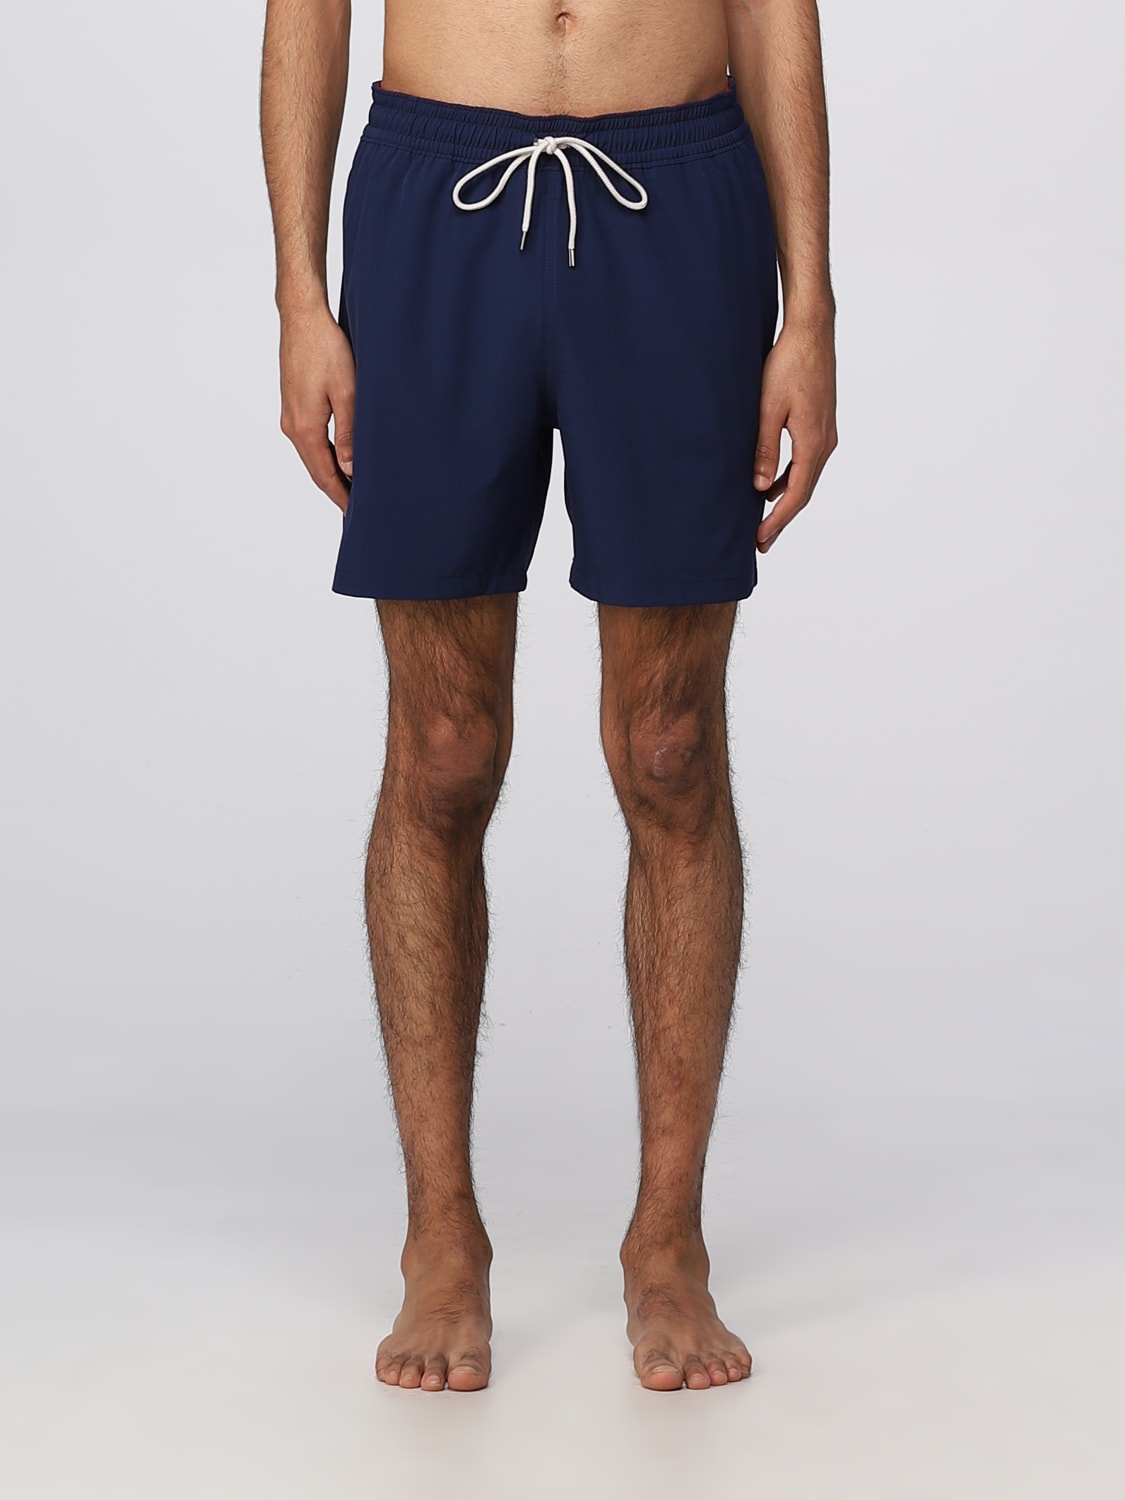 Polo Ralph Lauren Outlet: swimsuit for man - Blue | Polo Ralph